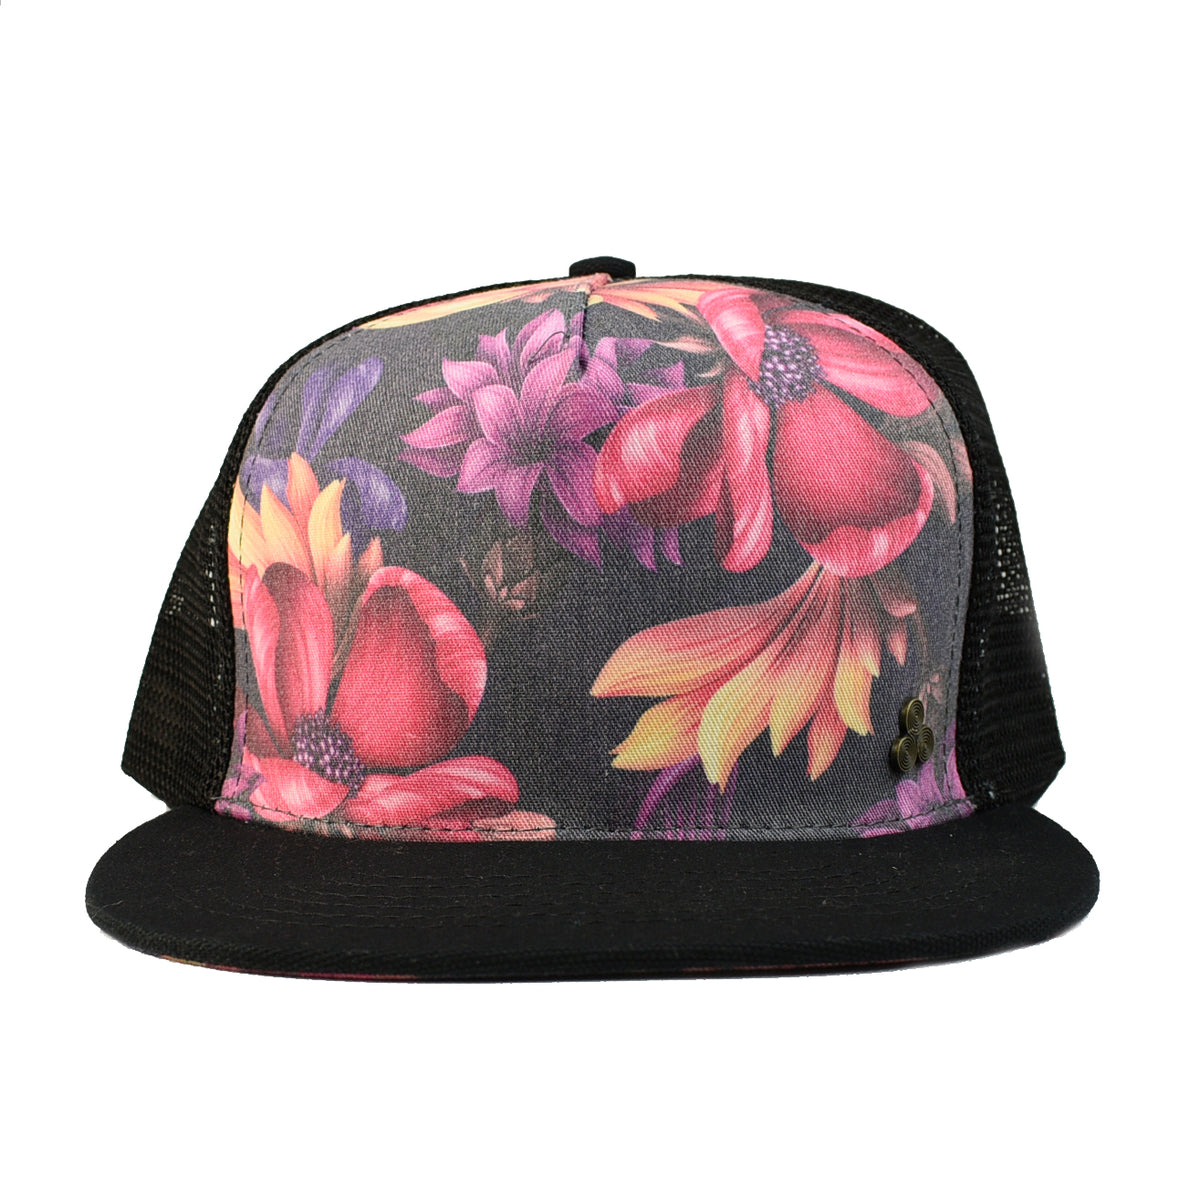 Floral Trucker Hat for Women| Men Caps and Eco-Friendly